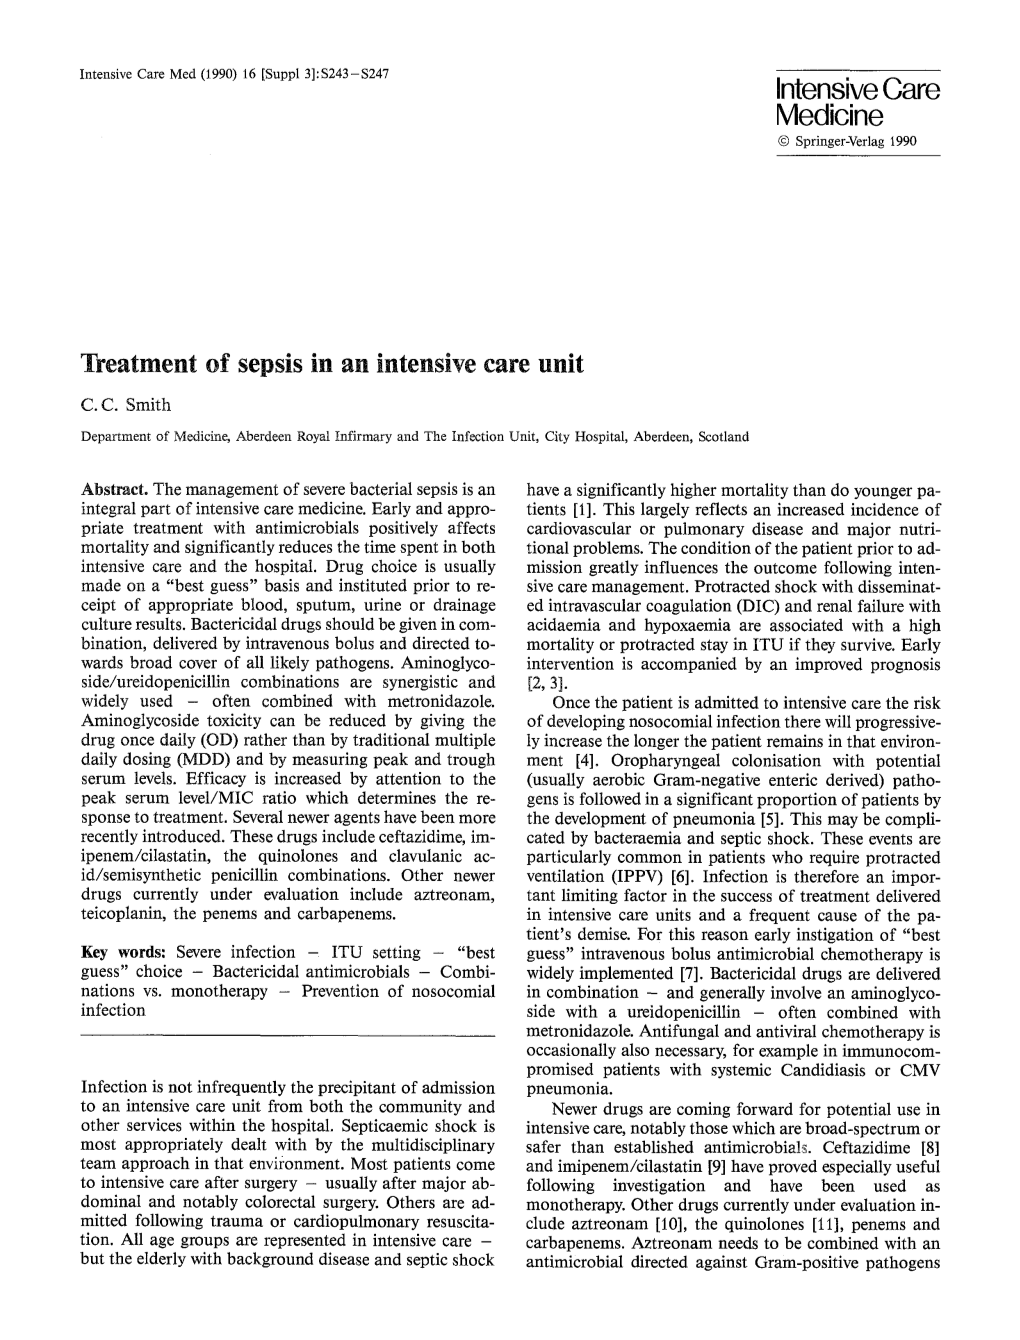 Treatment of Sepsis in an Intensive Care Unit